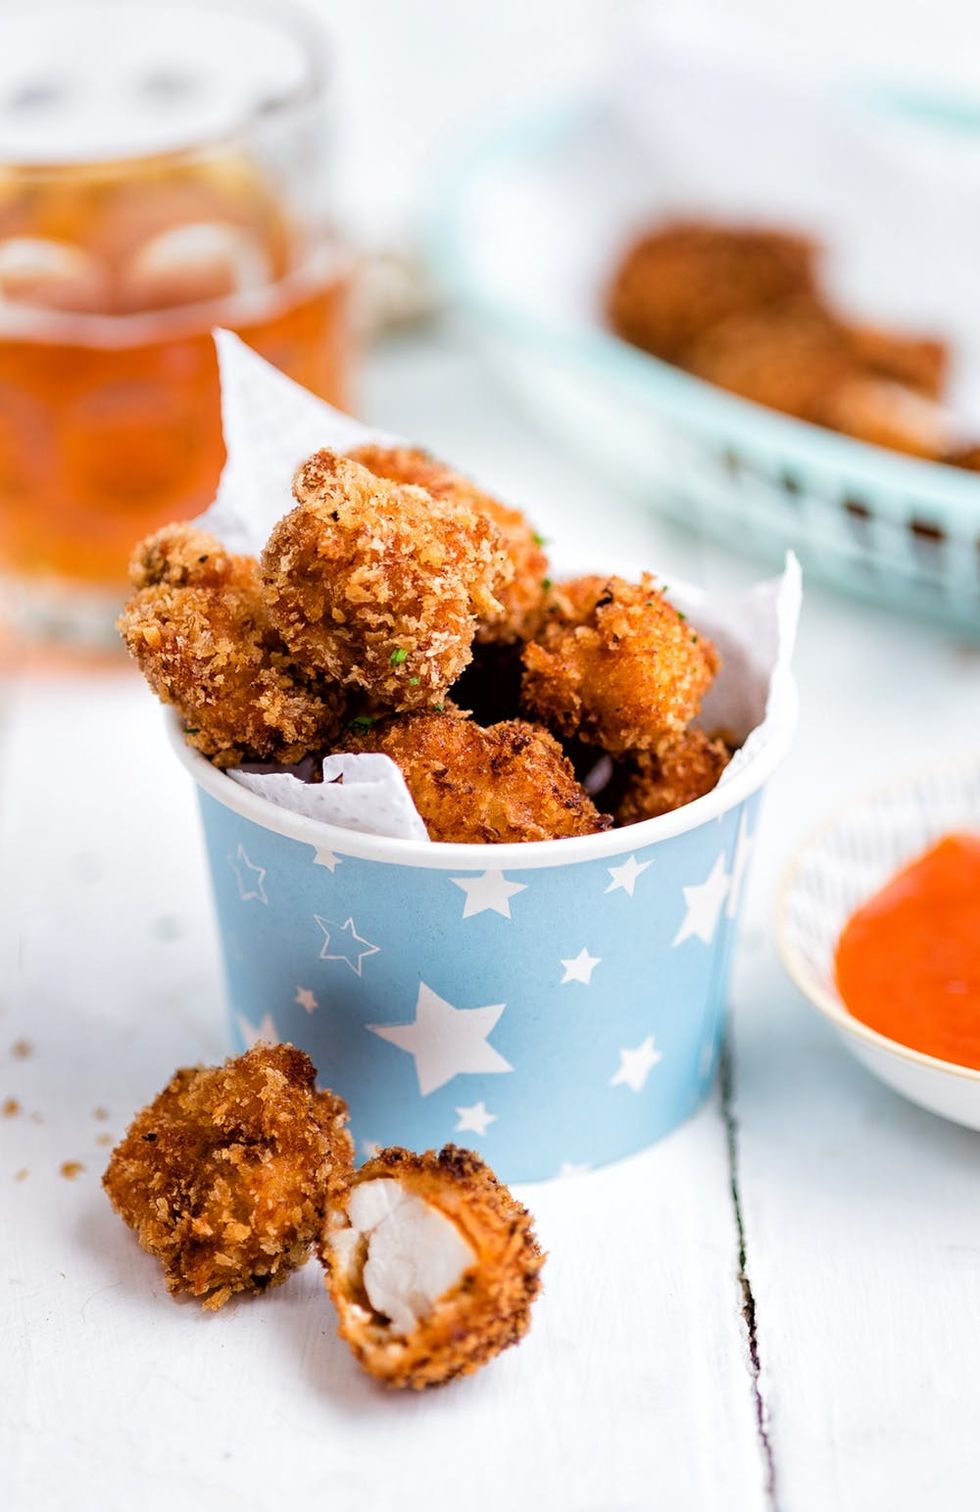 Celebrate National Fried Chicken day with super-addictive popcorn chicken with hot chilli sauce. Finger lickin' good!